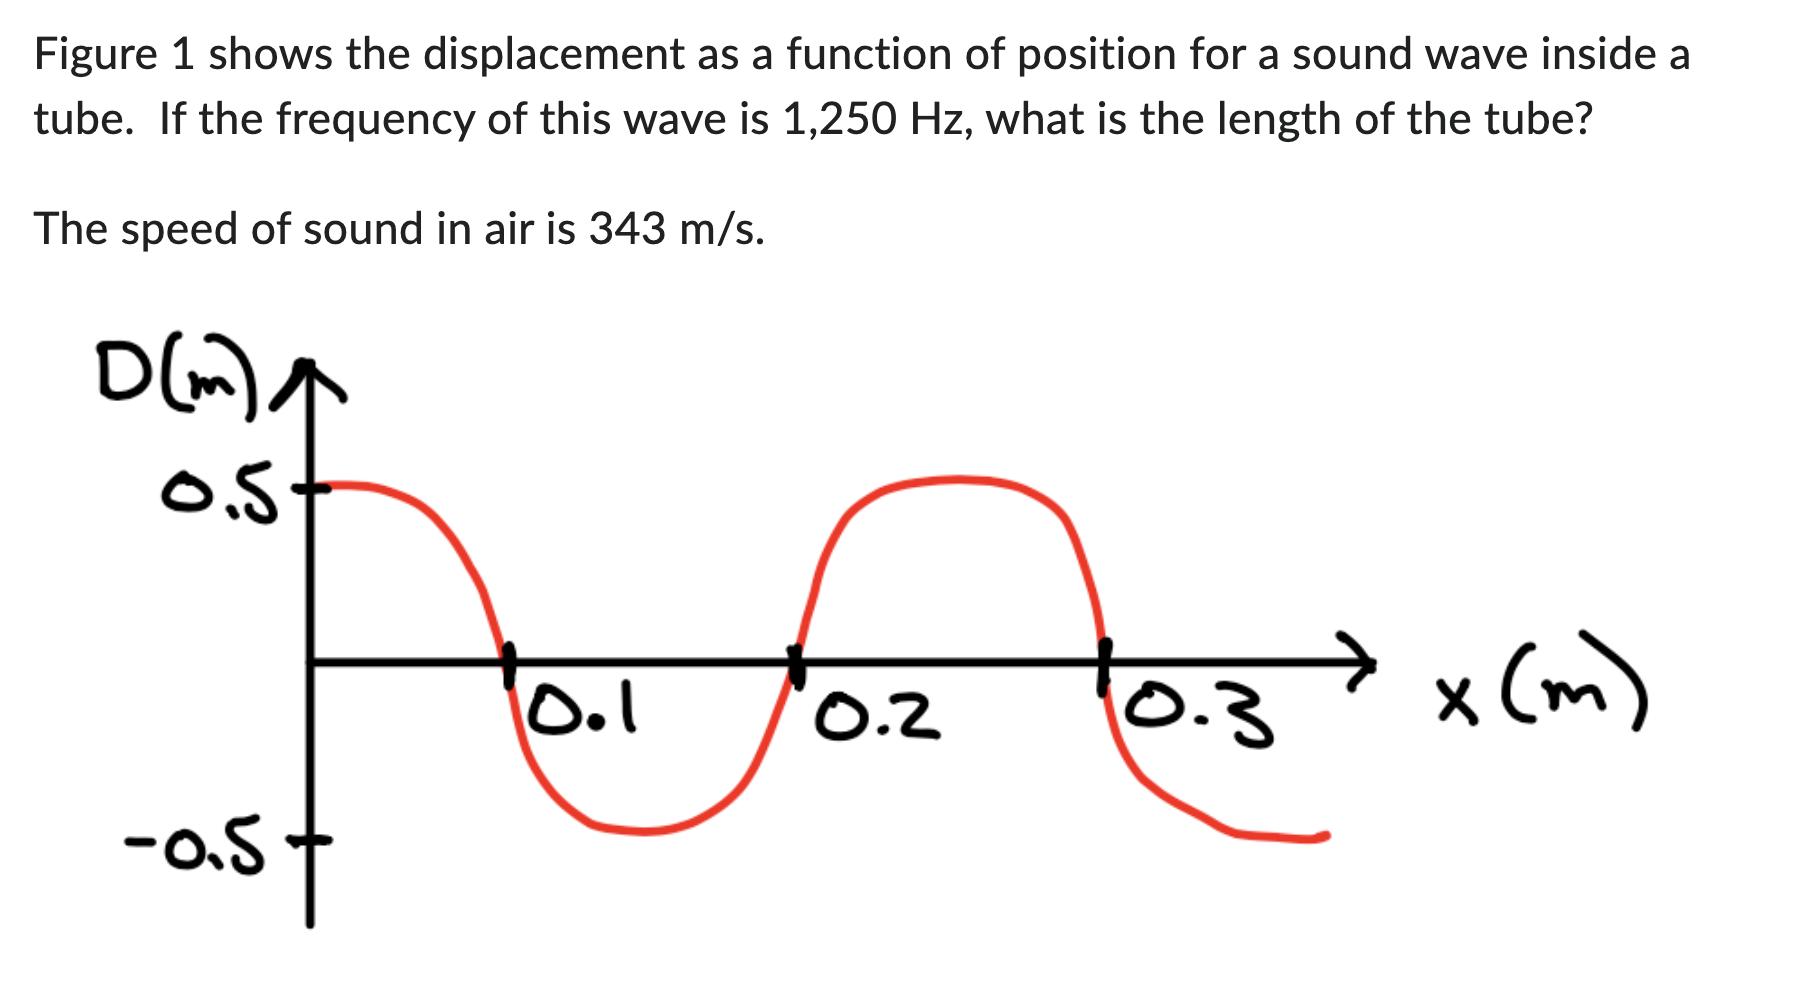 Figure 1 shows the displacement as a function of position for a sound wave inside a tube. If the frequency of this wave is (